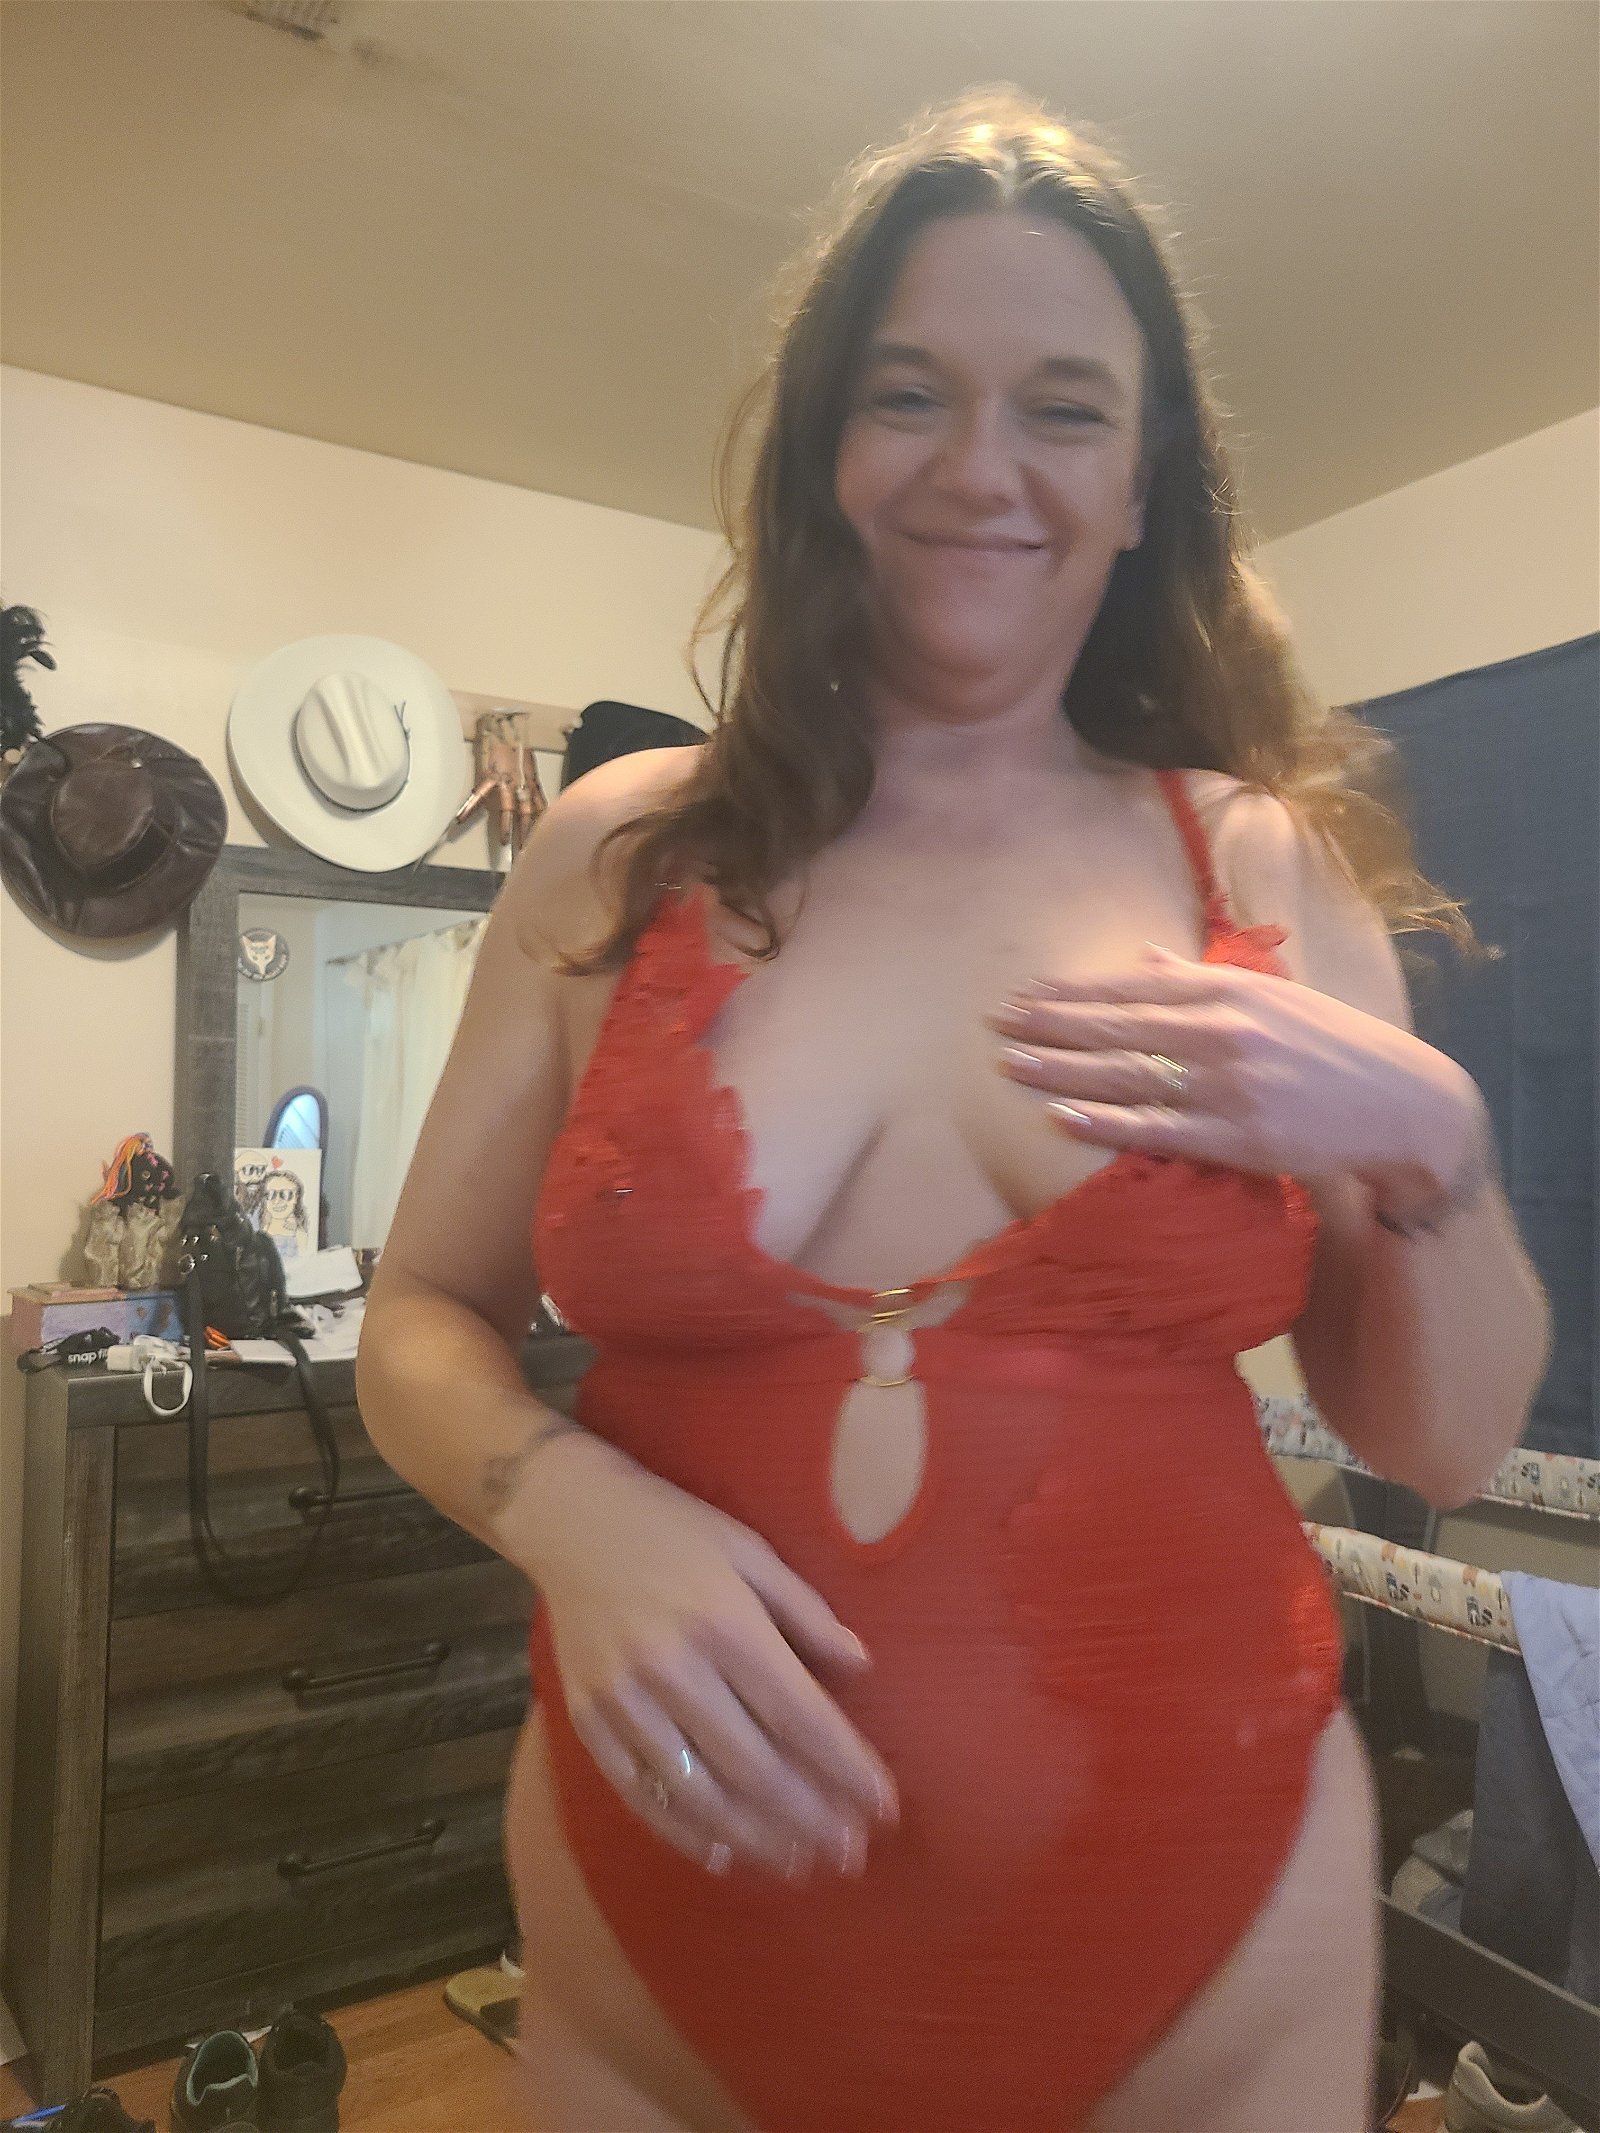 Photo by ExhibCouplePlayTime with the username @ExhibCouplePlayTime, who is a verified user,  February 16, 2024 at 12:49 AM. The post is about the topic MILF and the text says 'New red lingerie, hubby liked it a lot, he came so hard inside me while i rode his cock reverse cowgirl!'